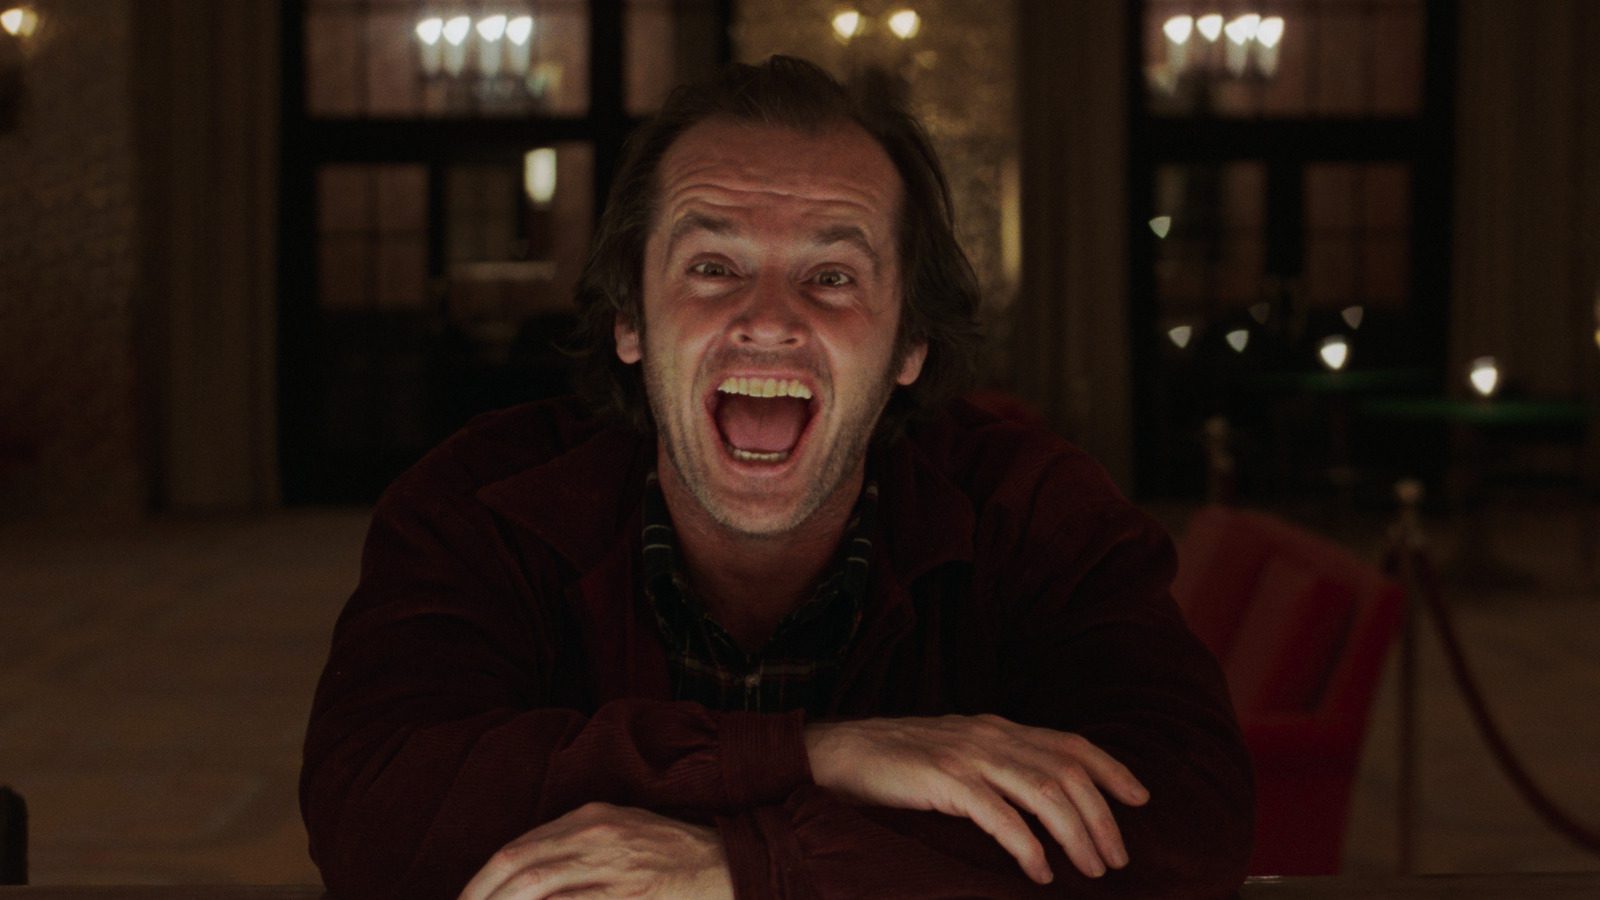 The Most Villainous Laughs In Cinematic History Ranked